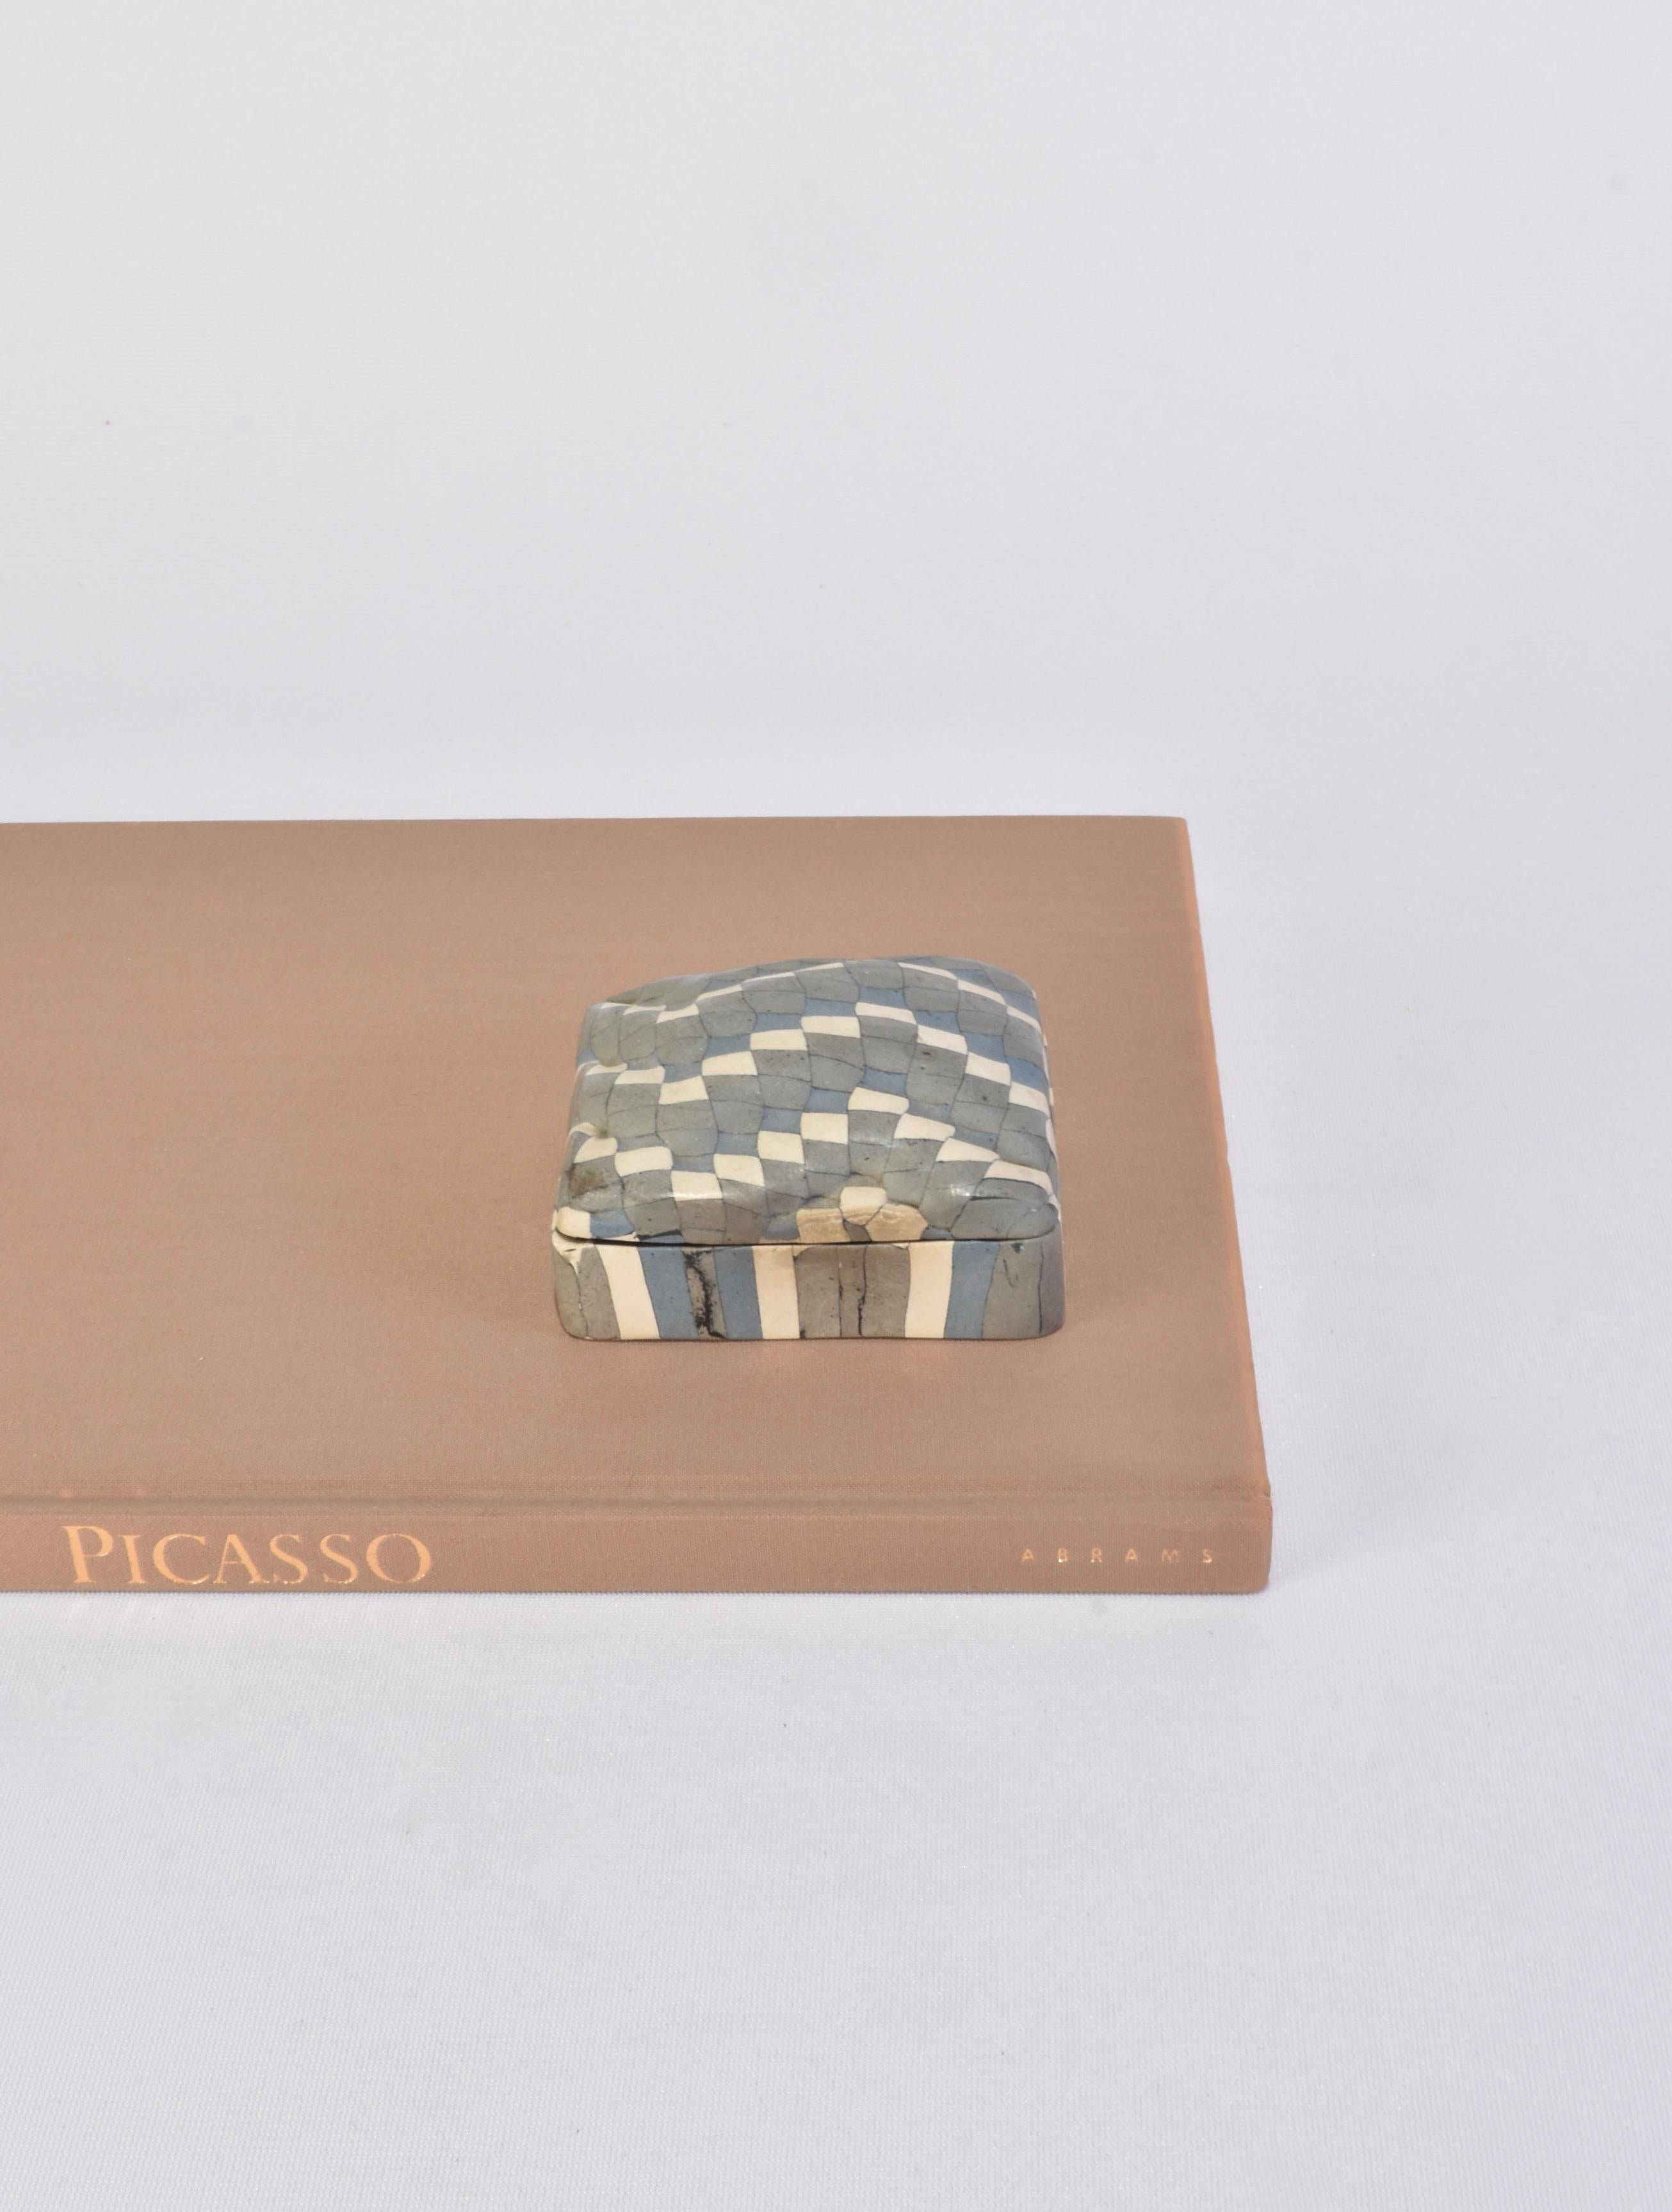 Handmade petite ceramic box in a checkered pattern with a striped base. Glazed in grey, white and blue. Signed on base.